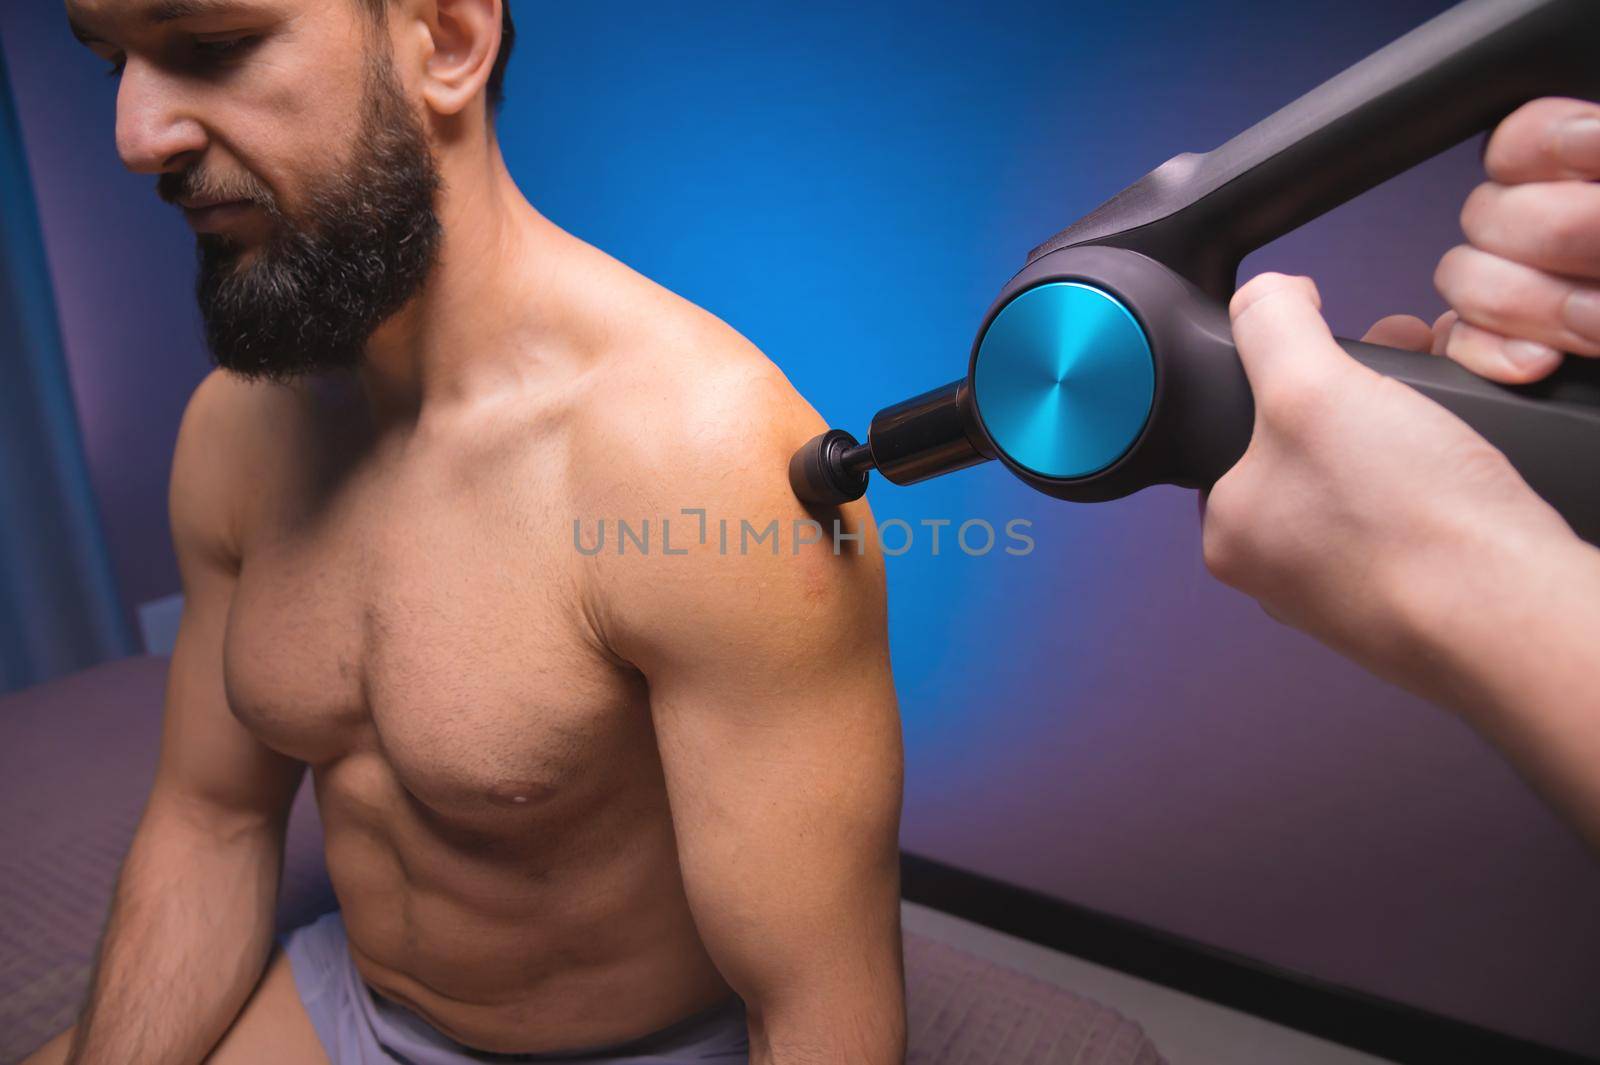 Bearded caucasian man getting percussion shoulder massage by a massager in a professional massage parlour. shock wave muscle recovery technique.